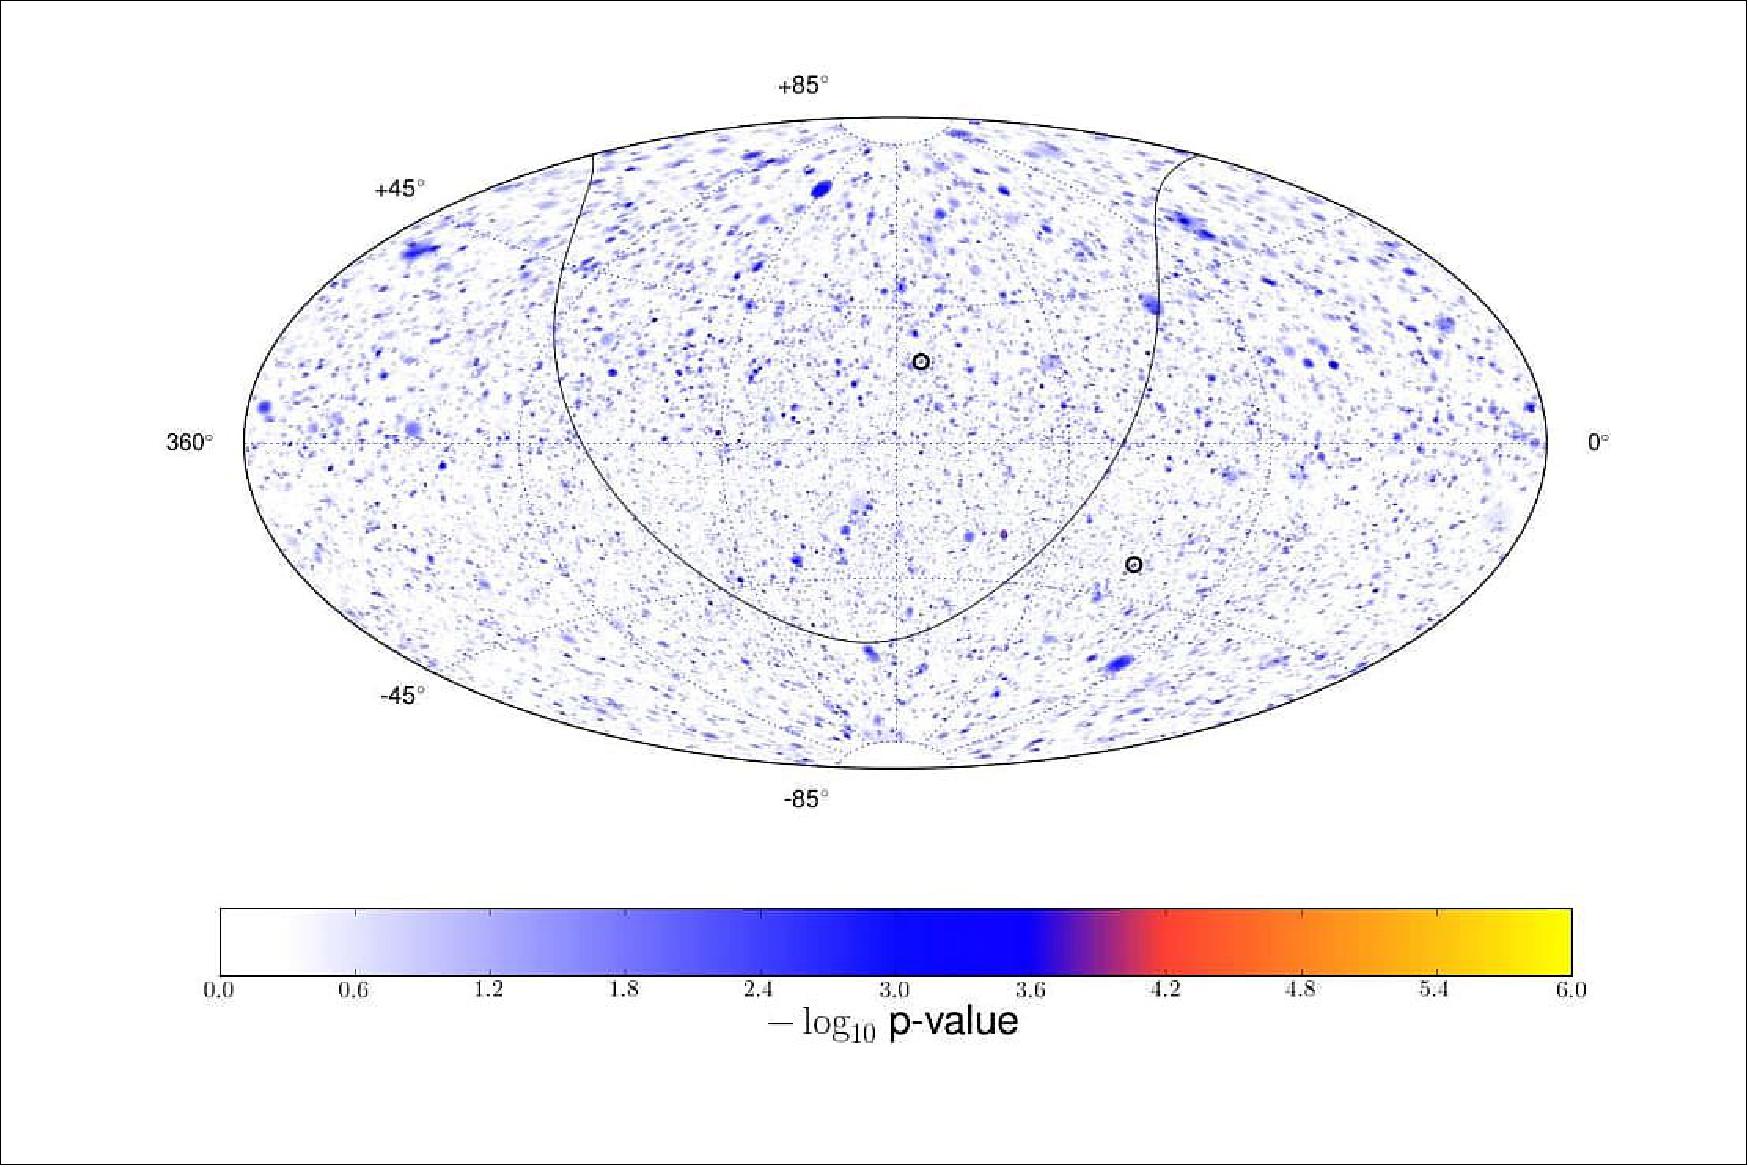 Figure 12: IC86 II-IV sky map in equatorial coordinates showing the pretrial p-values for the best-fit flare hypothesis tested in each direction of the sky. The strongest time-dependent Gaussian-like signal is in the northern sky with a post-trial p-value of 17.7%. The solid black curve indicates the Galactic plane, and the hottest spot in each hemisphere is in a black circle (image credit: IceCube Collaboration)